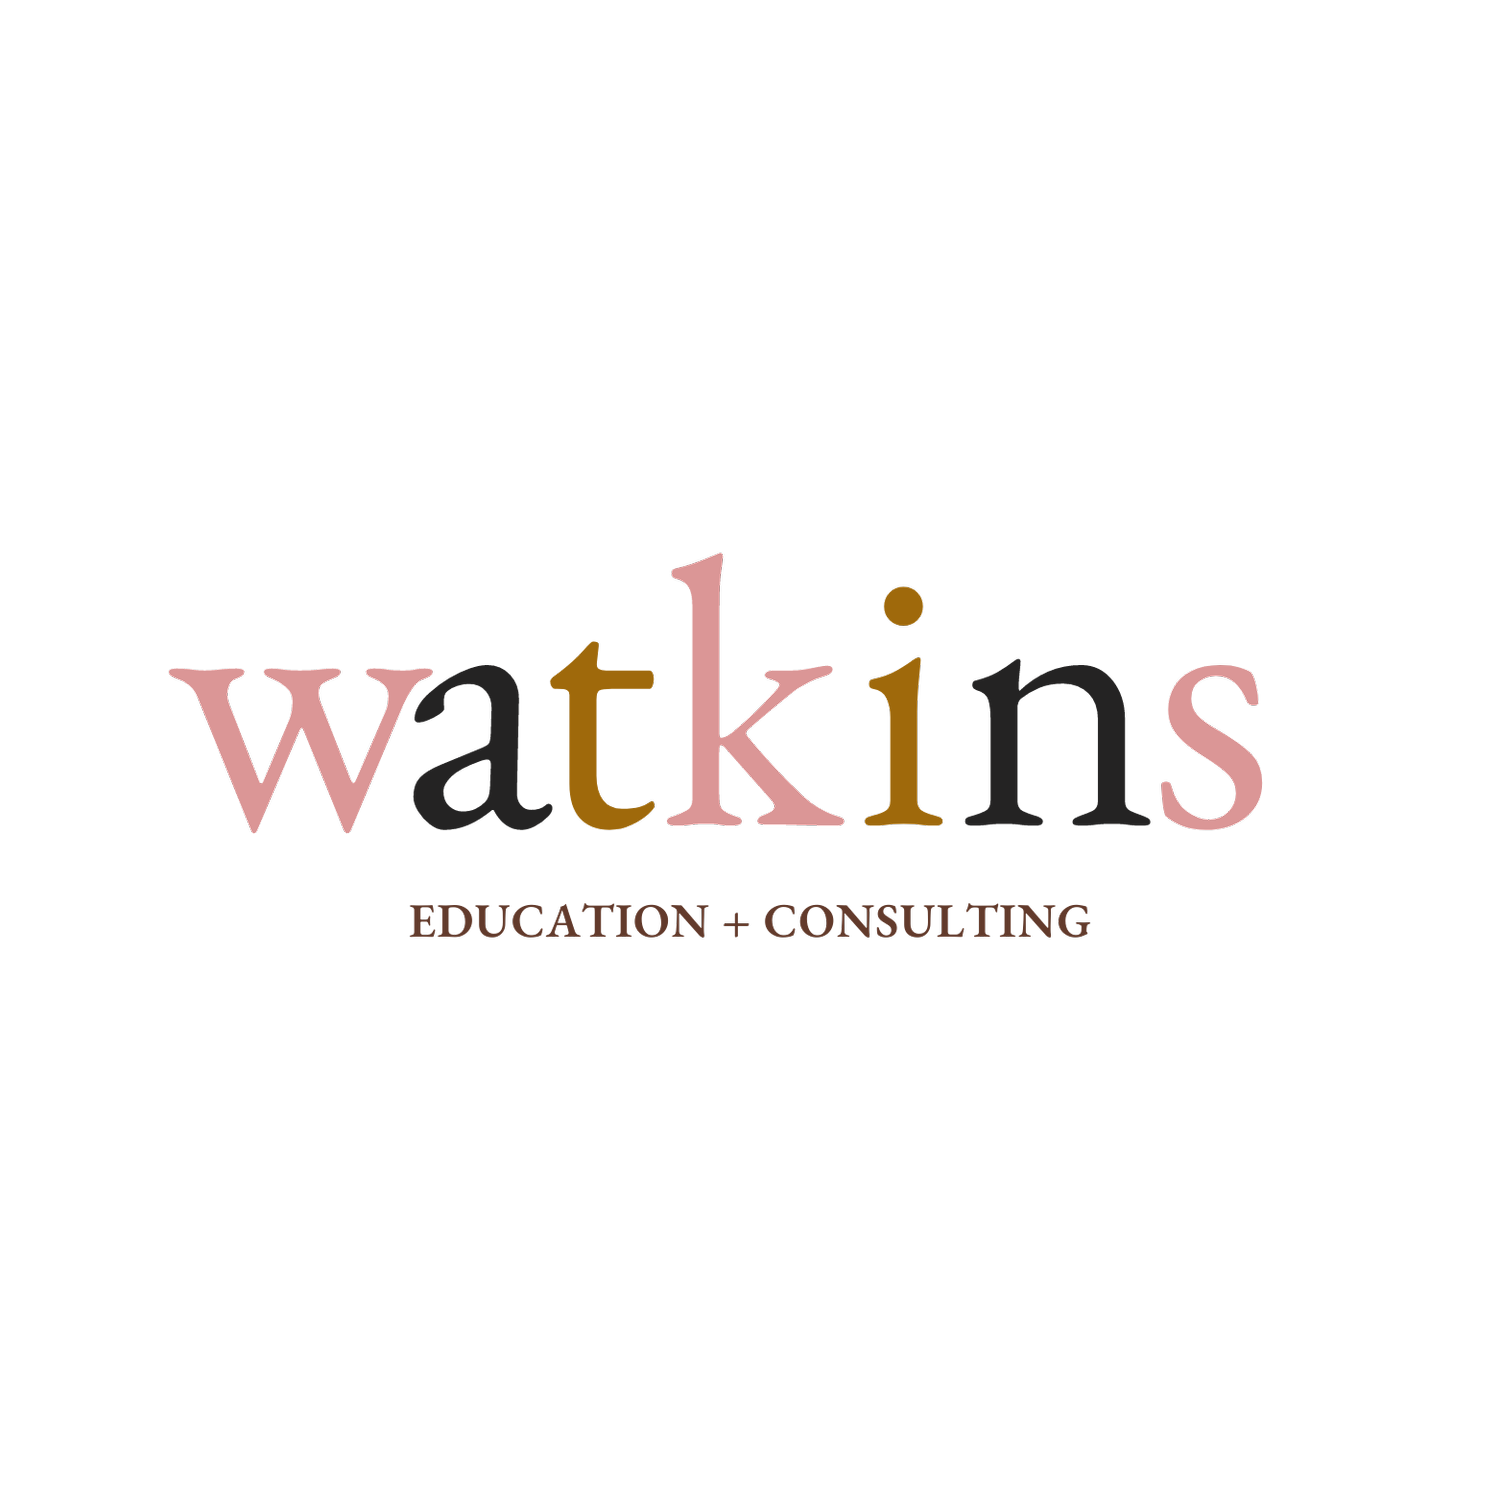 Watkins Education + Consulting